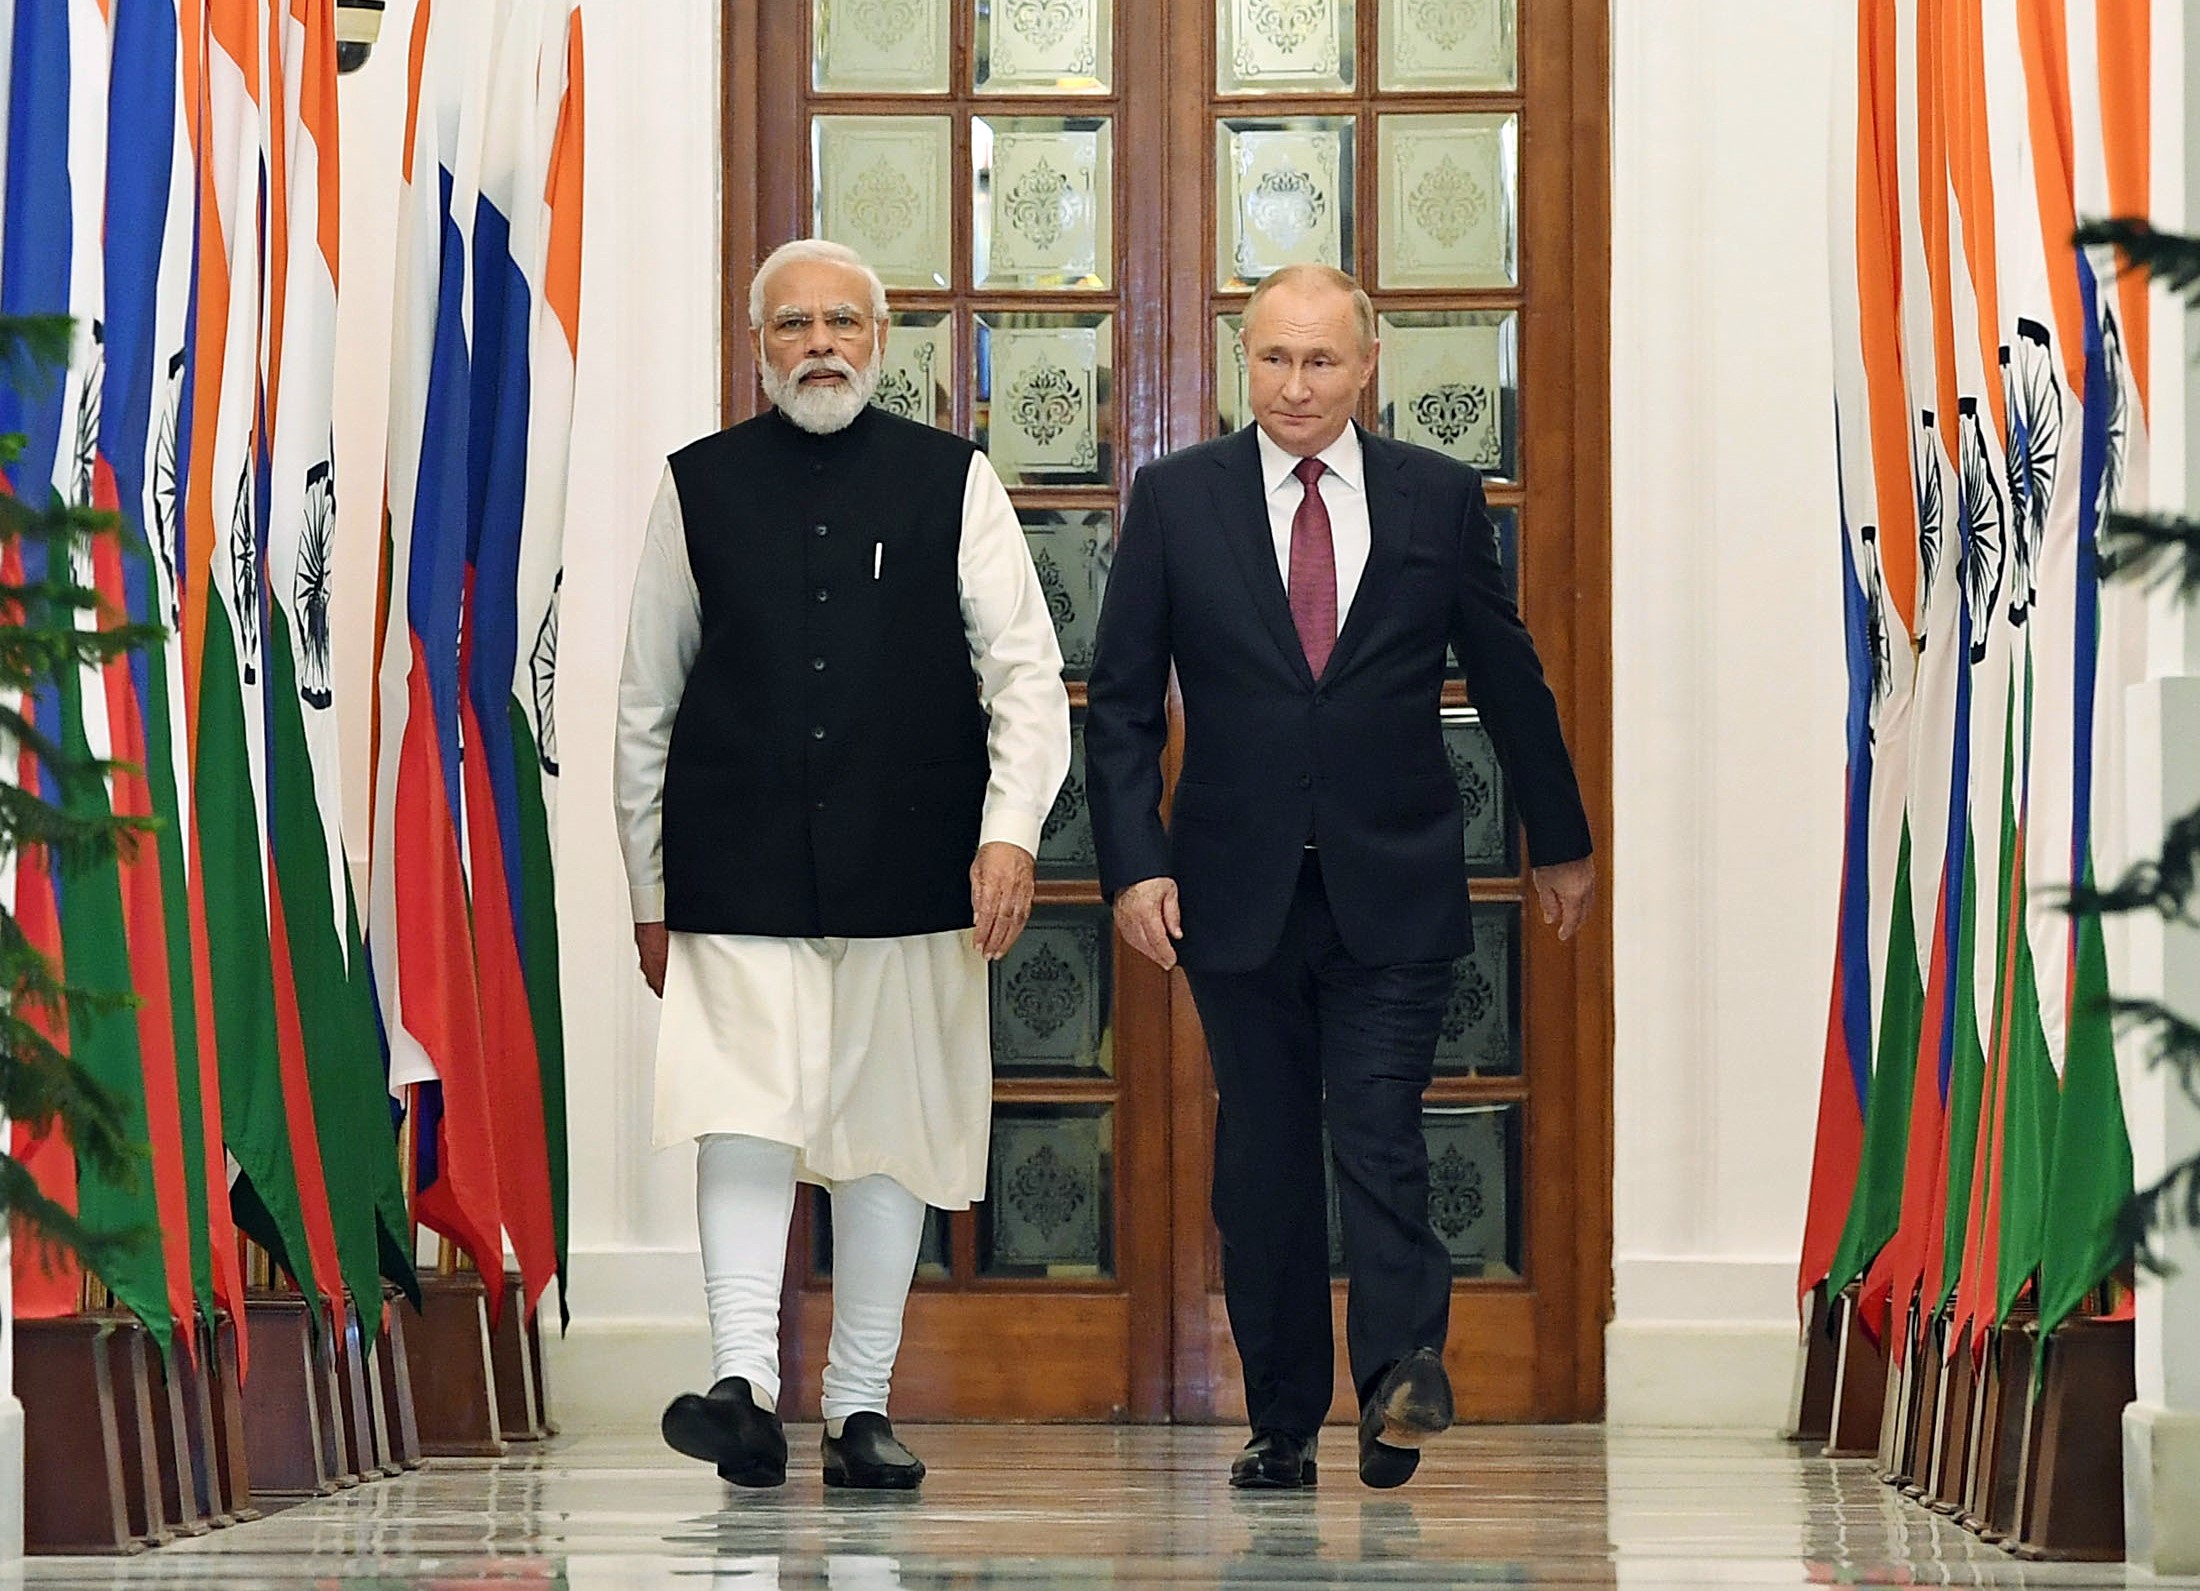 President Putin’s visit to India and launch of a revitalized partnership